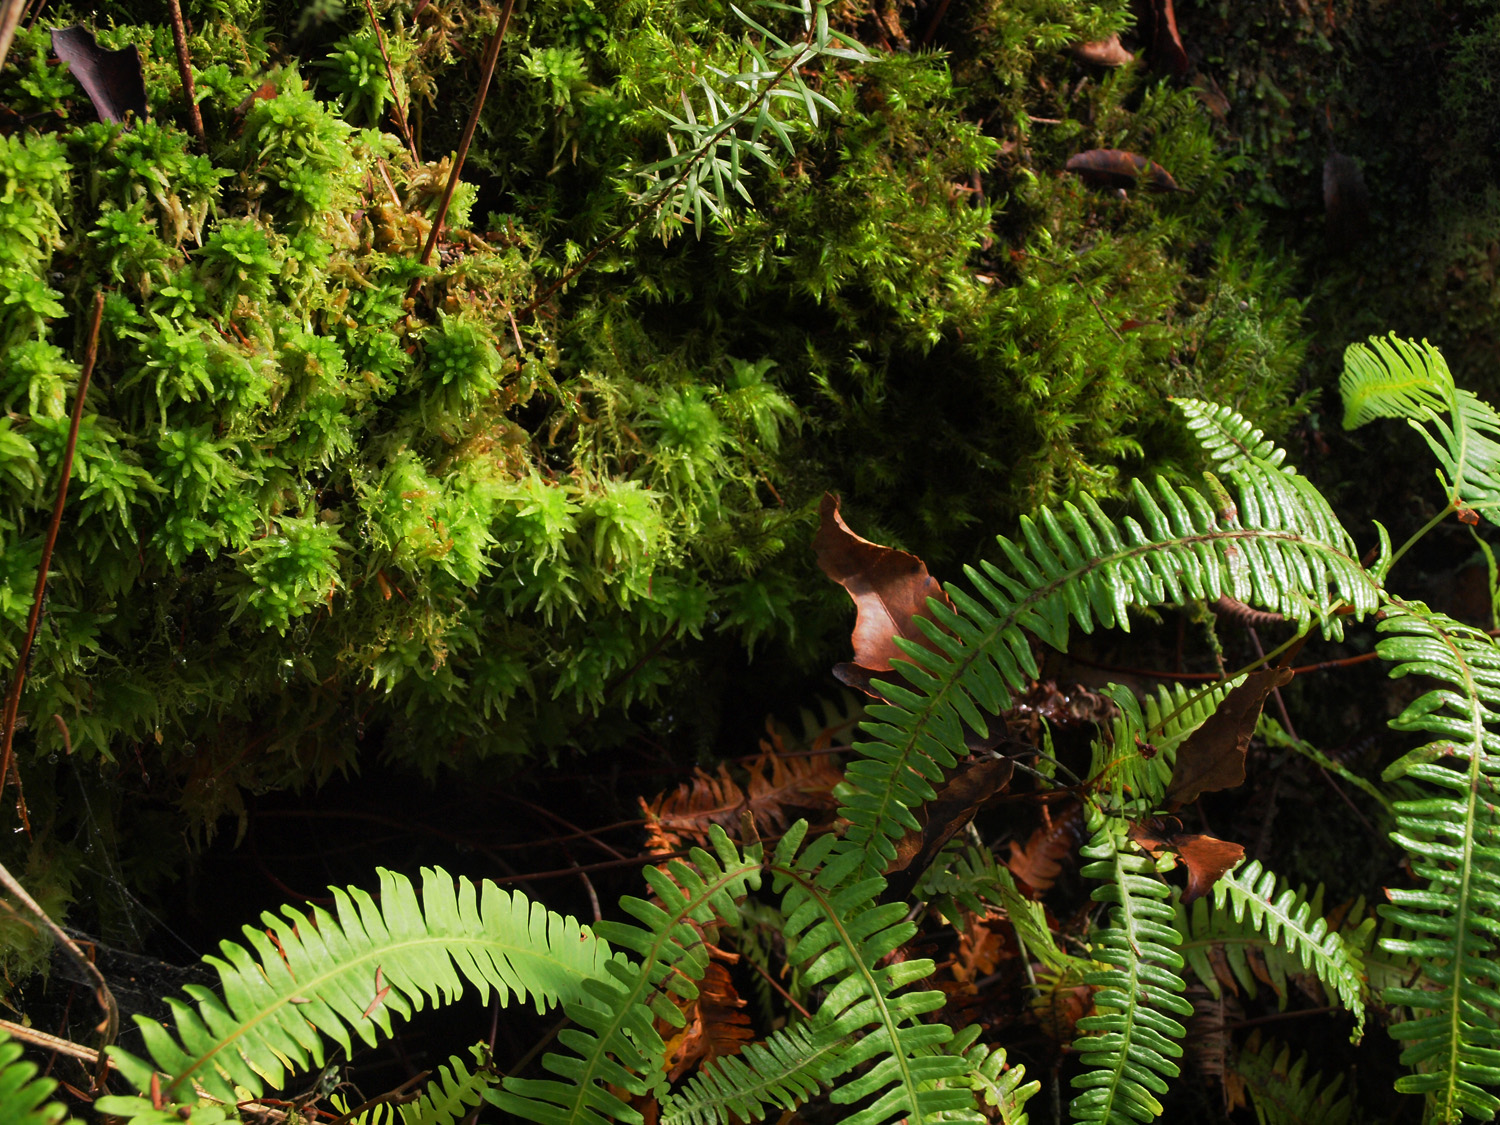 N0.7 Ferns and Moss